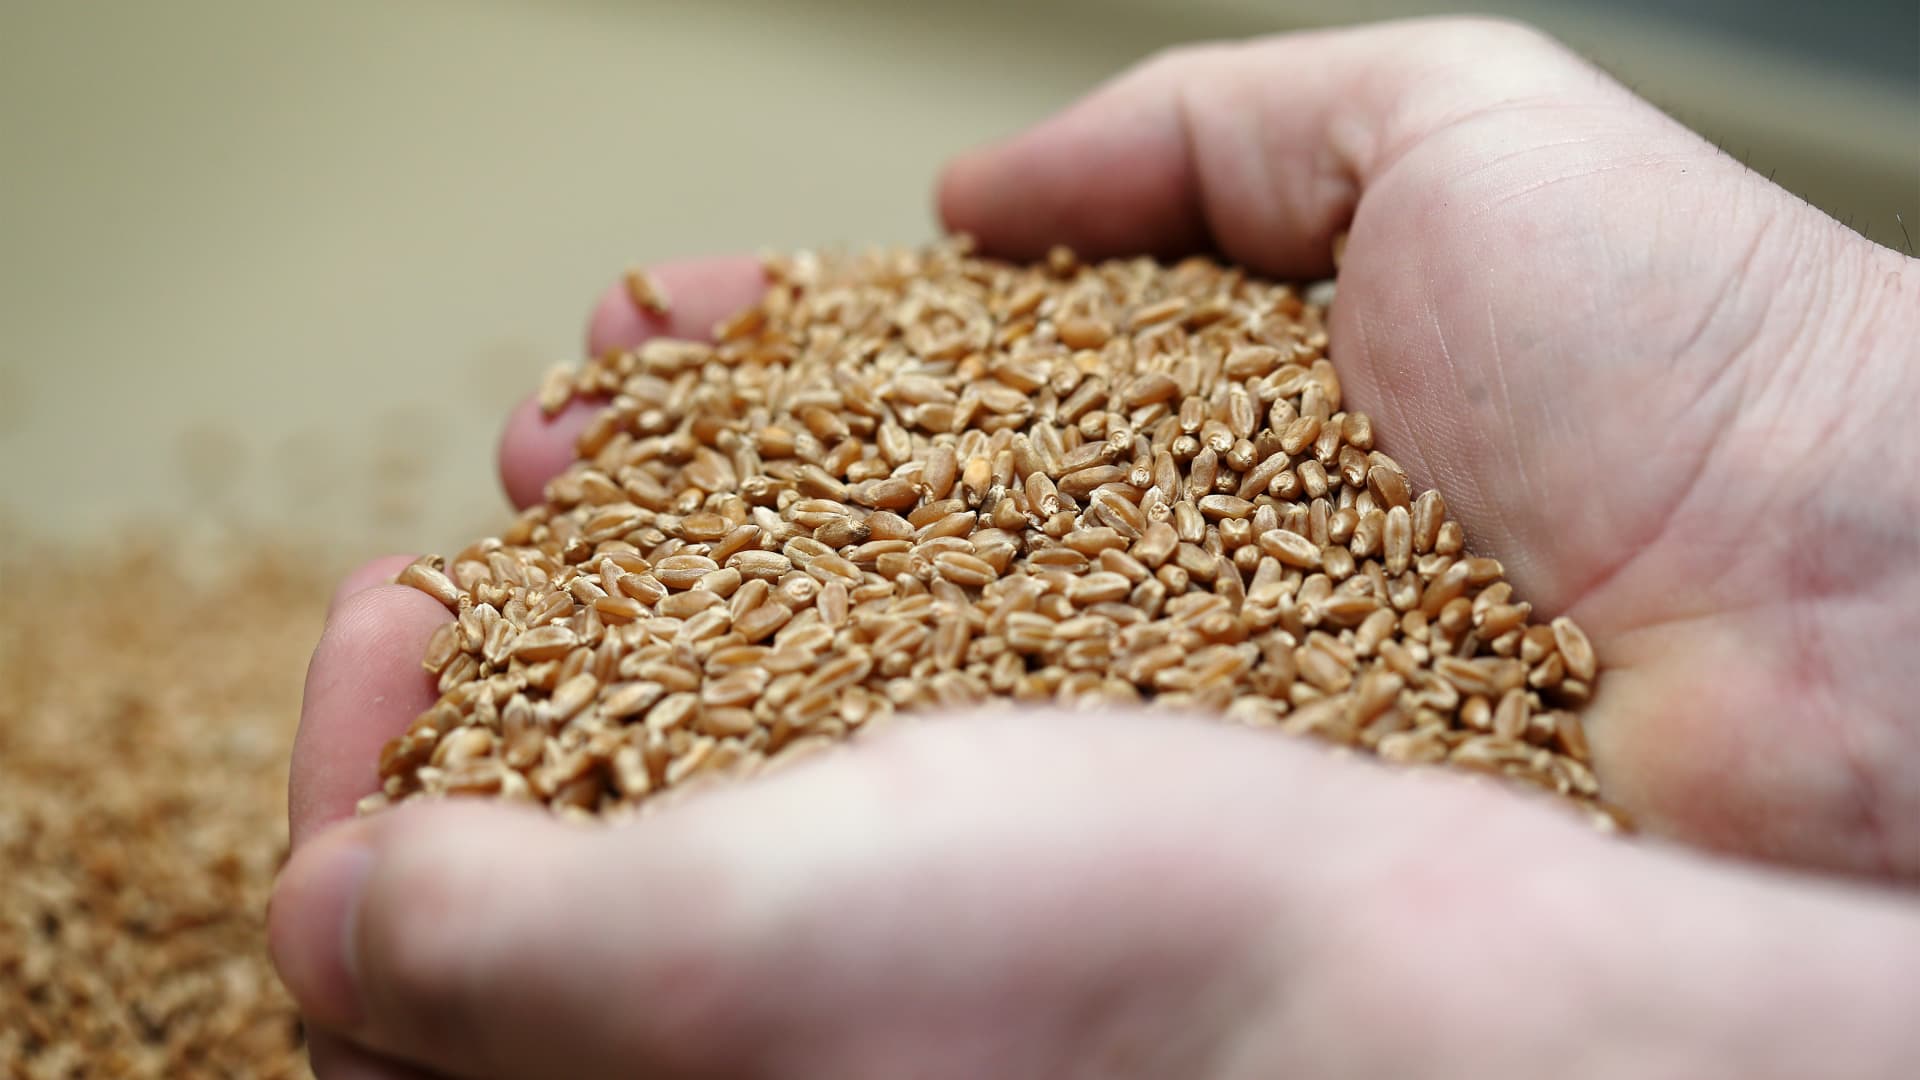 AGCO CEO says he expects grain shortage to last into next year